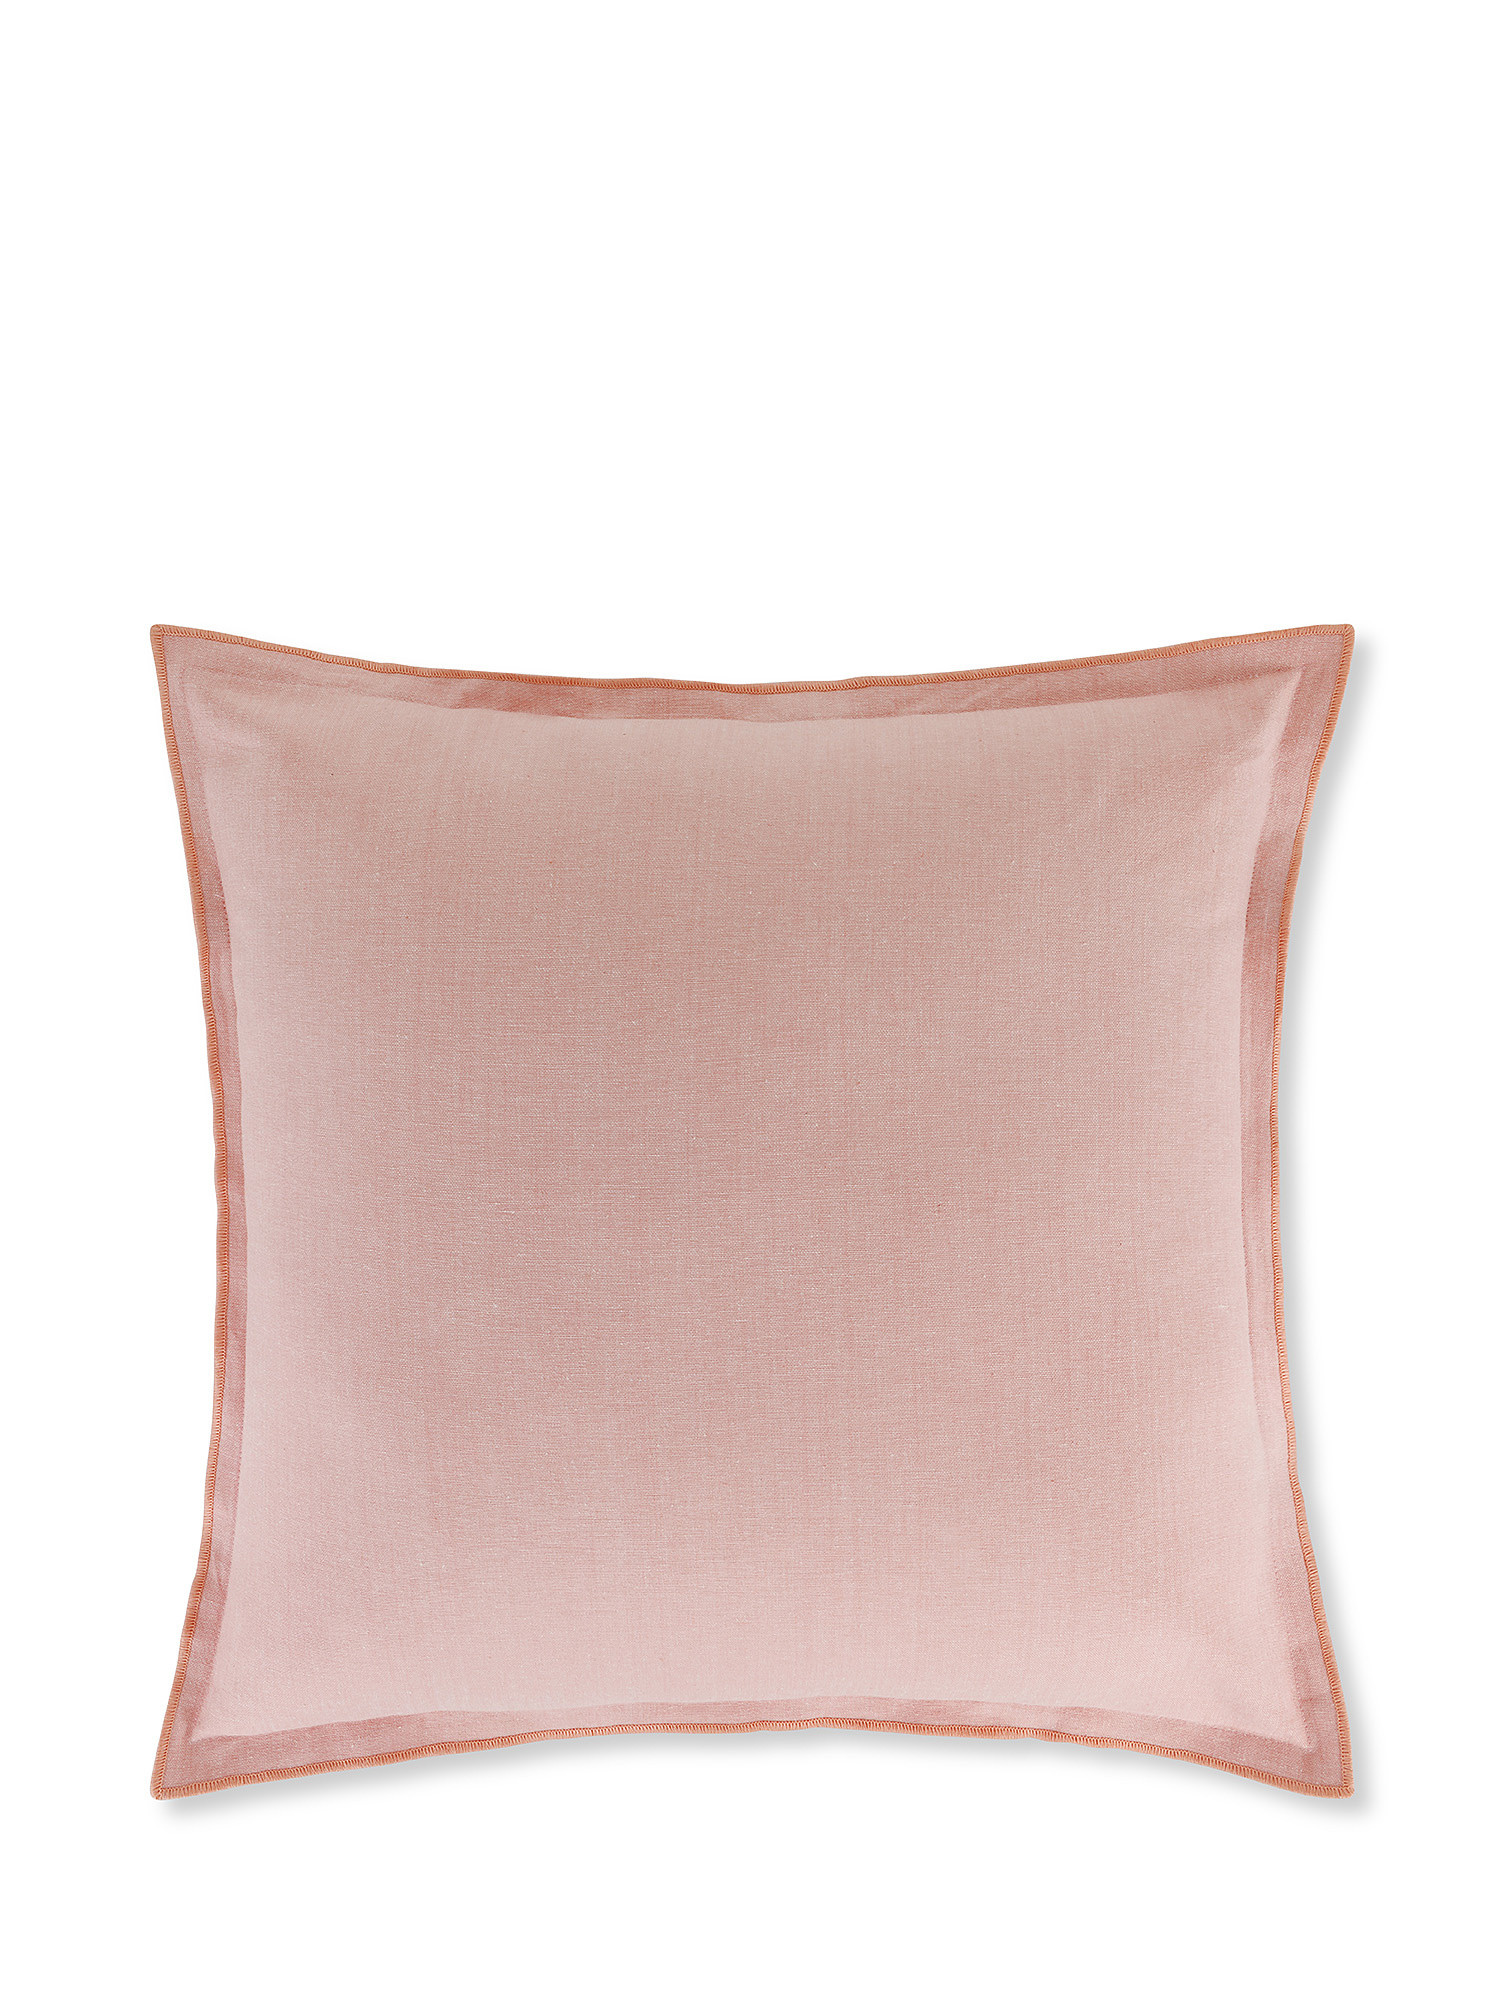 Solid color cotton cushion 45x45cm, Pink, large image number 0